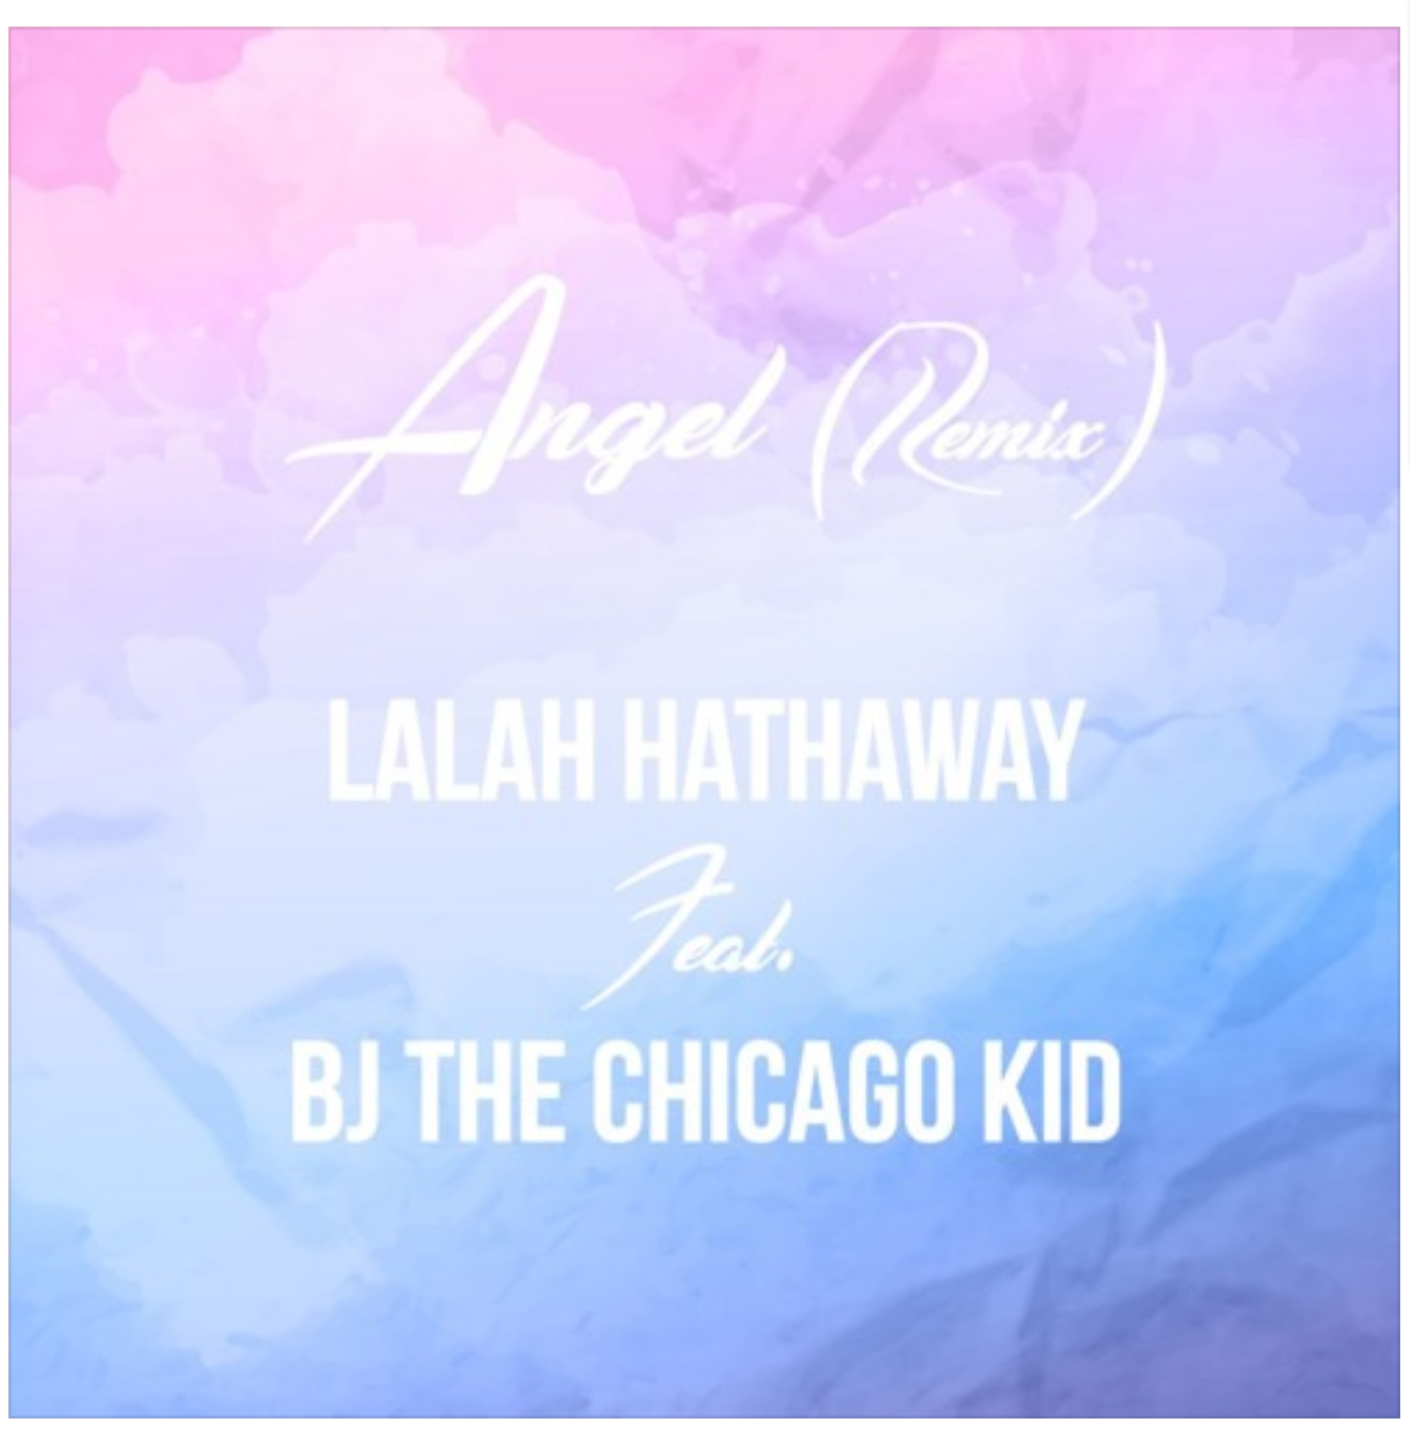 New Music: Lalah Hathaway – Angel (featuring BJ the Chicago Kid) (Remix)